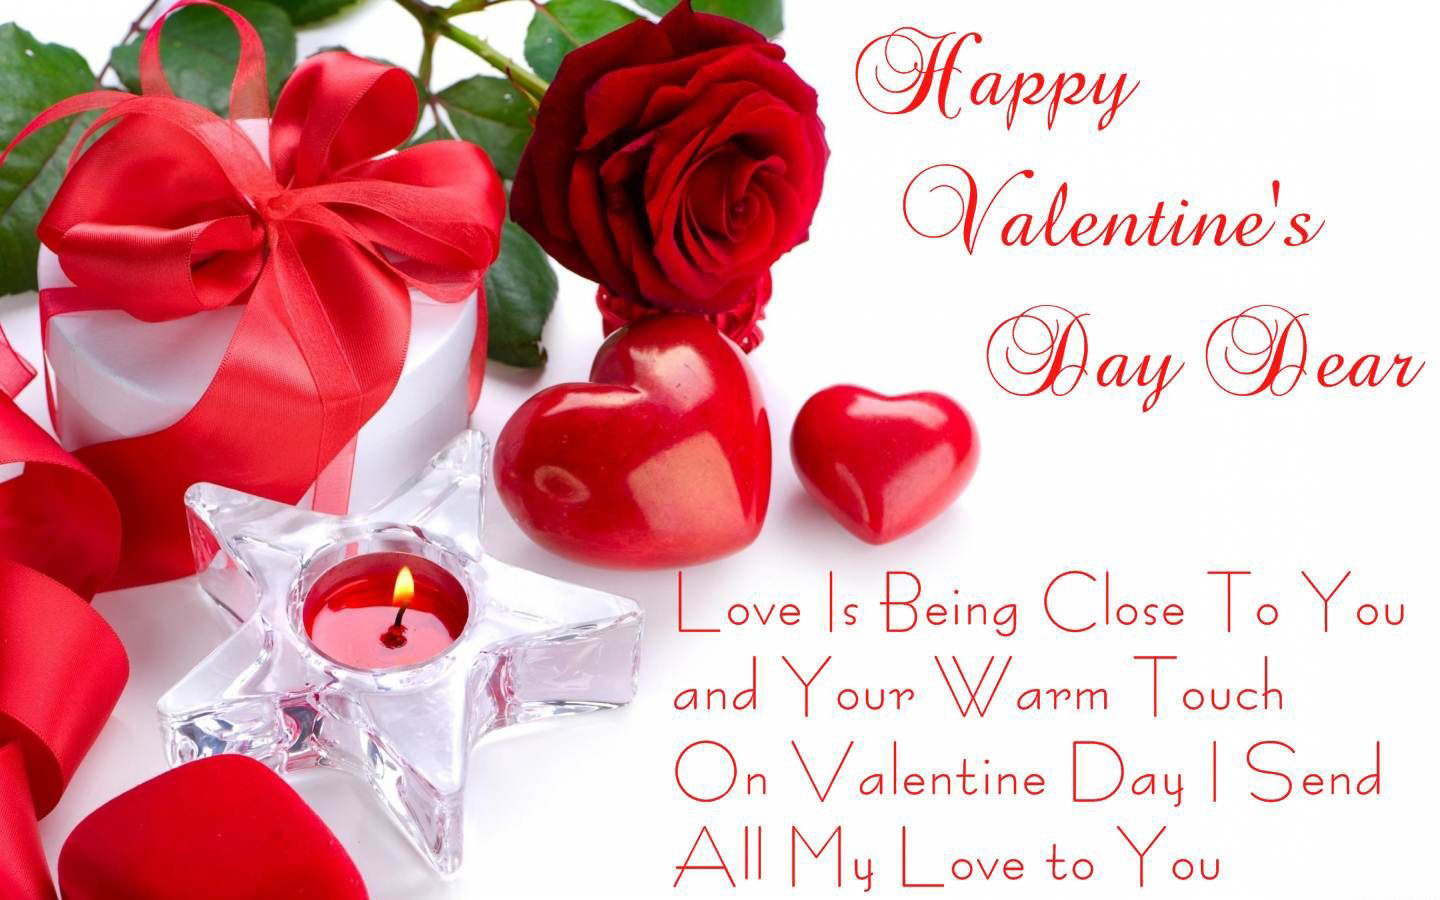 Top 100 Happy Valentines day Wishes Images Quotes Messages HD Wallpapers1440 x 900